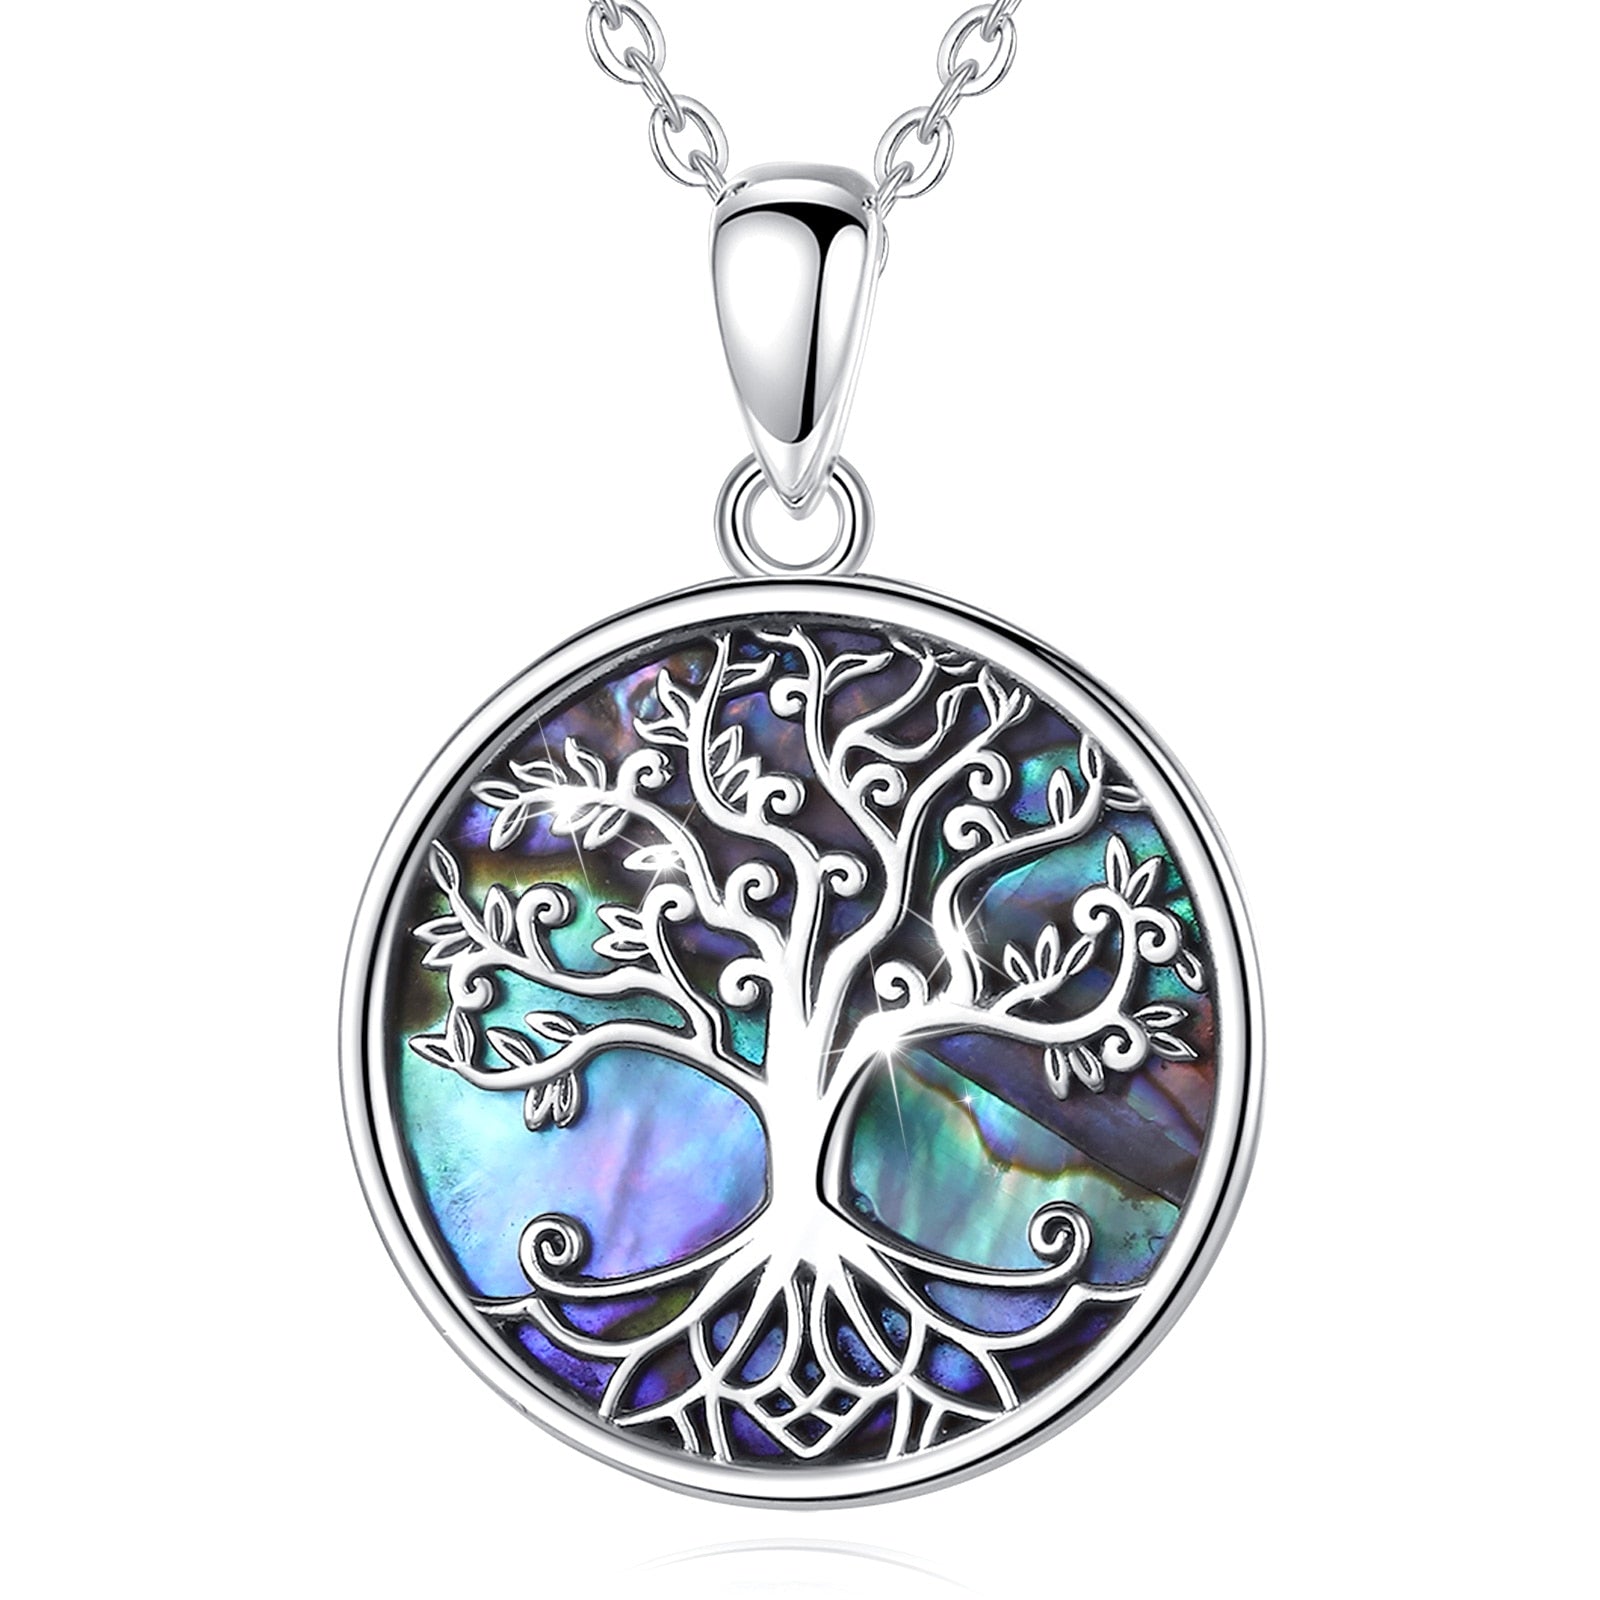 Yggdrasil 925 Sterling Silver Necklace on Abalone Shell